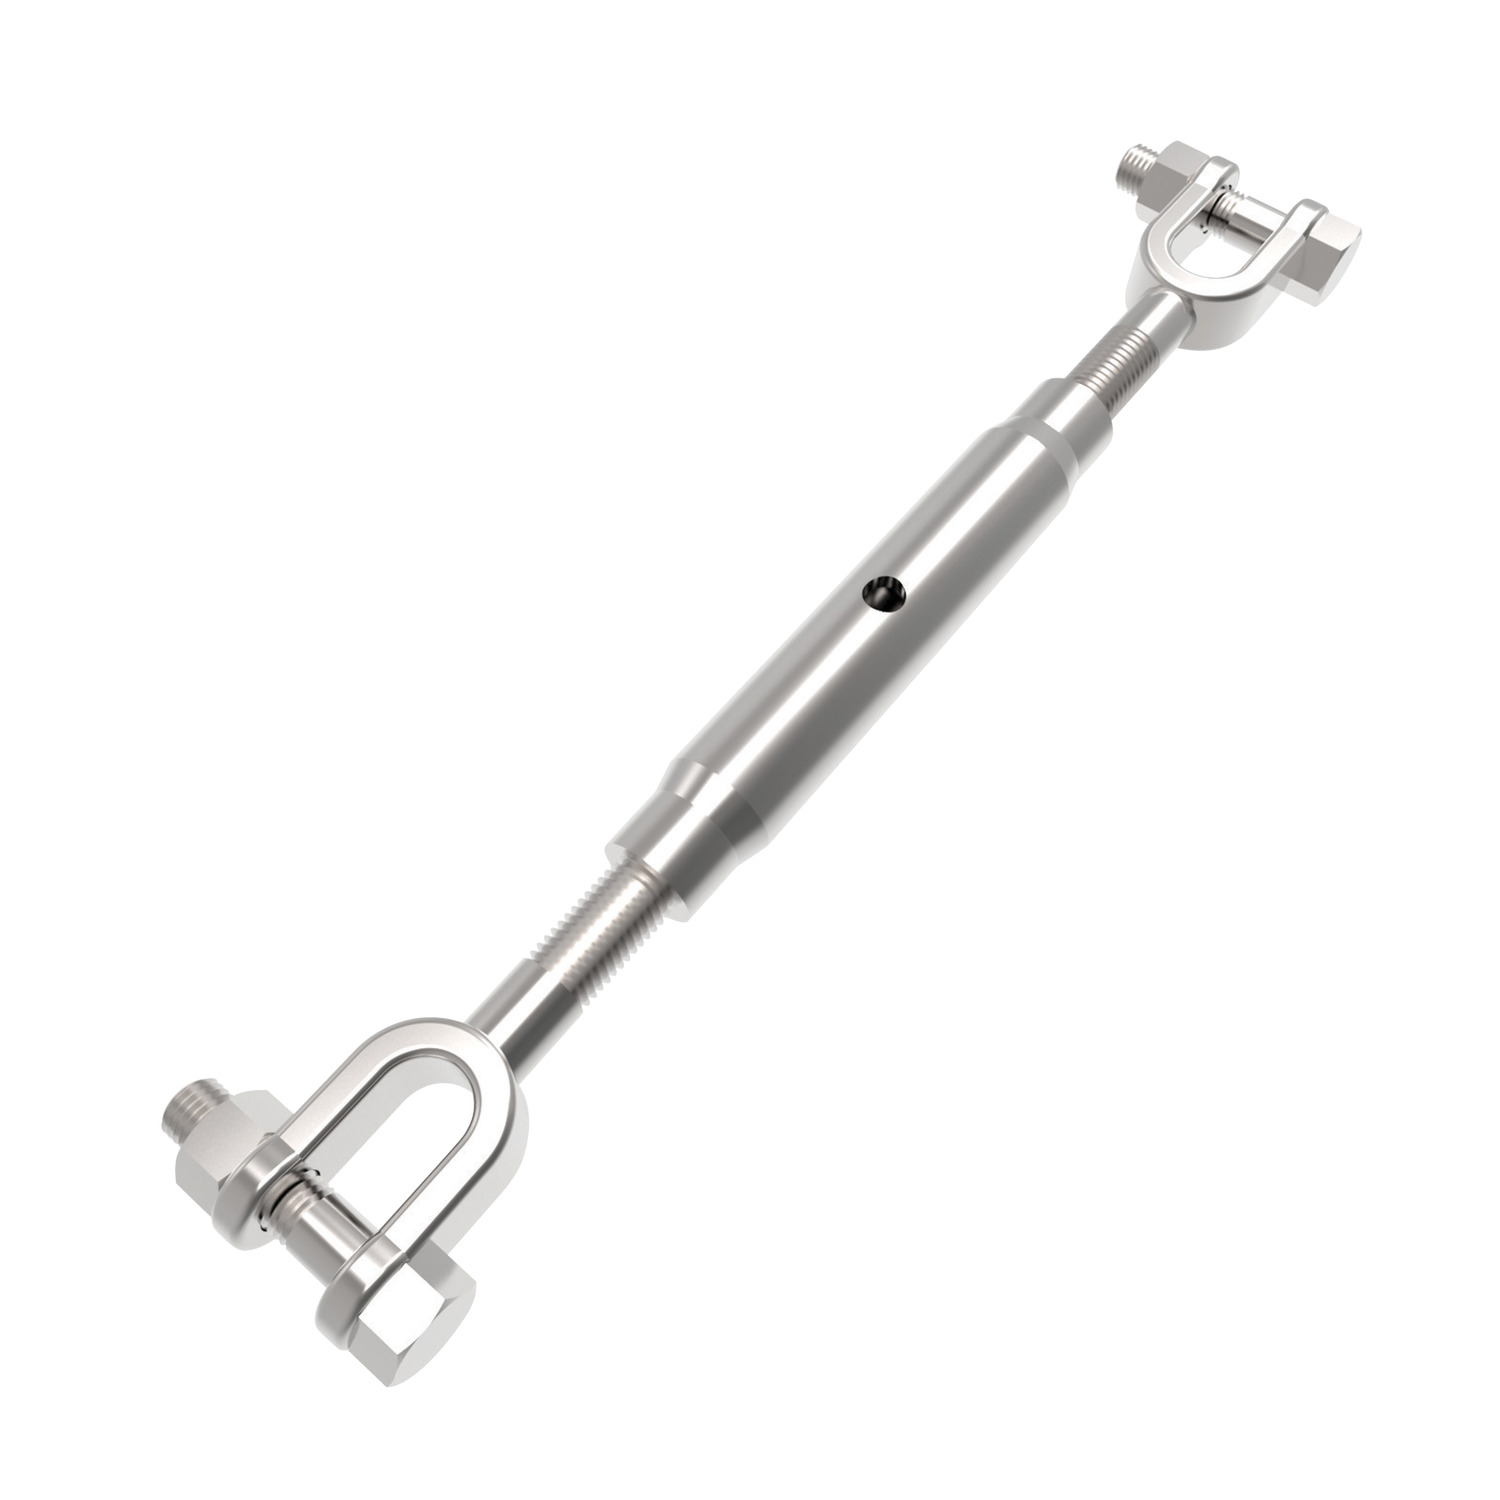 Product R3820, Jaw End Pipe Body Turnbuckles steel / 